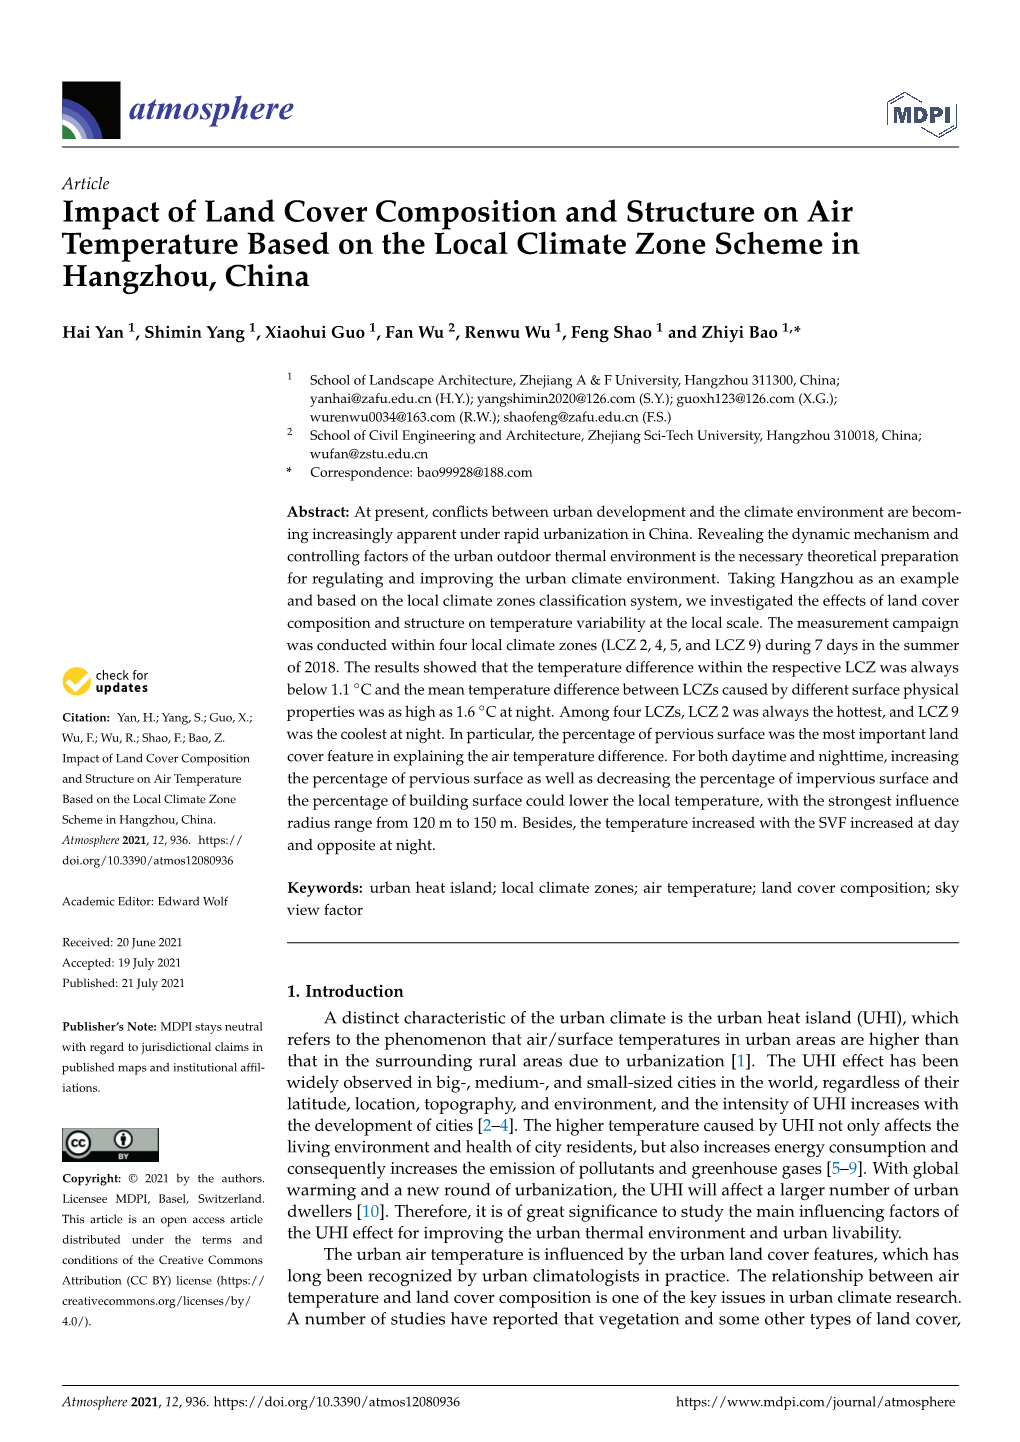 Impact of Land Cover Composition and Structure on Air Temperature Based on the Local Climate Zone Scheme in Hangzhou, China